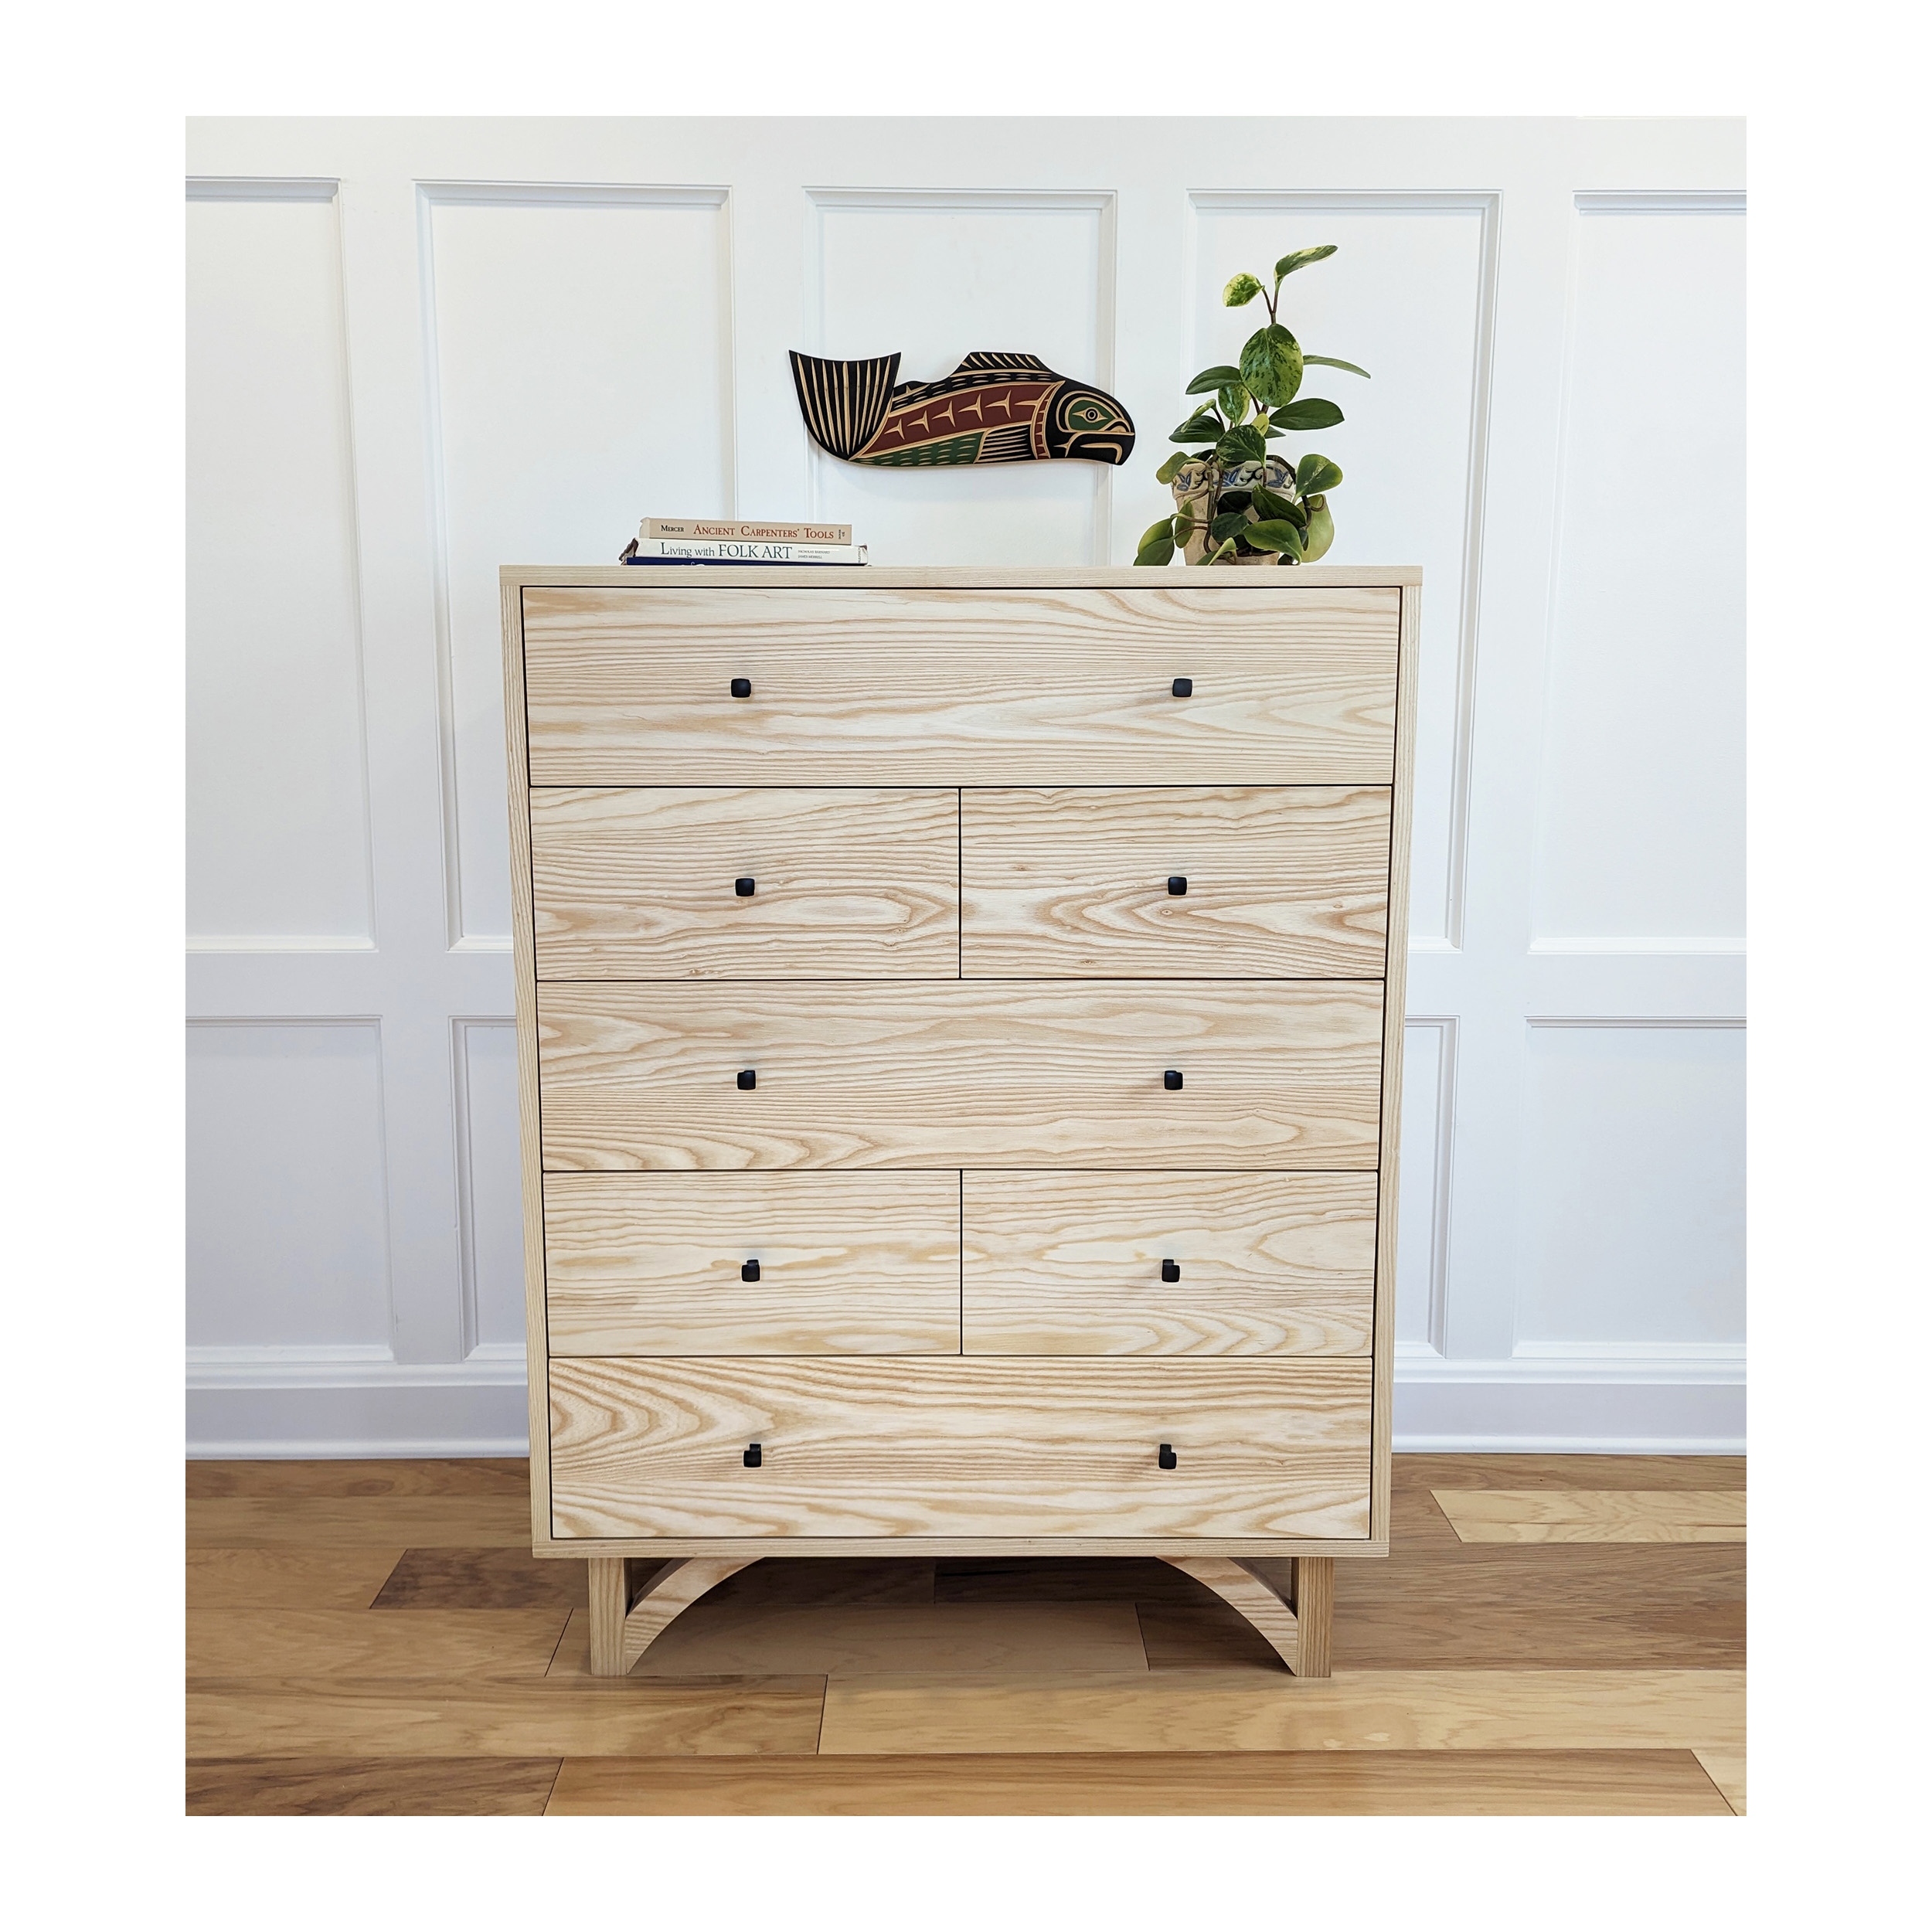 Series 454 Tall Dresser With Seven Drawers At 36″ In Width